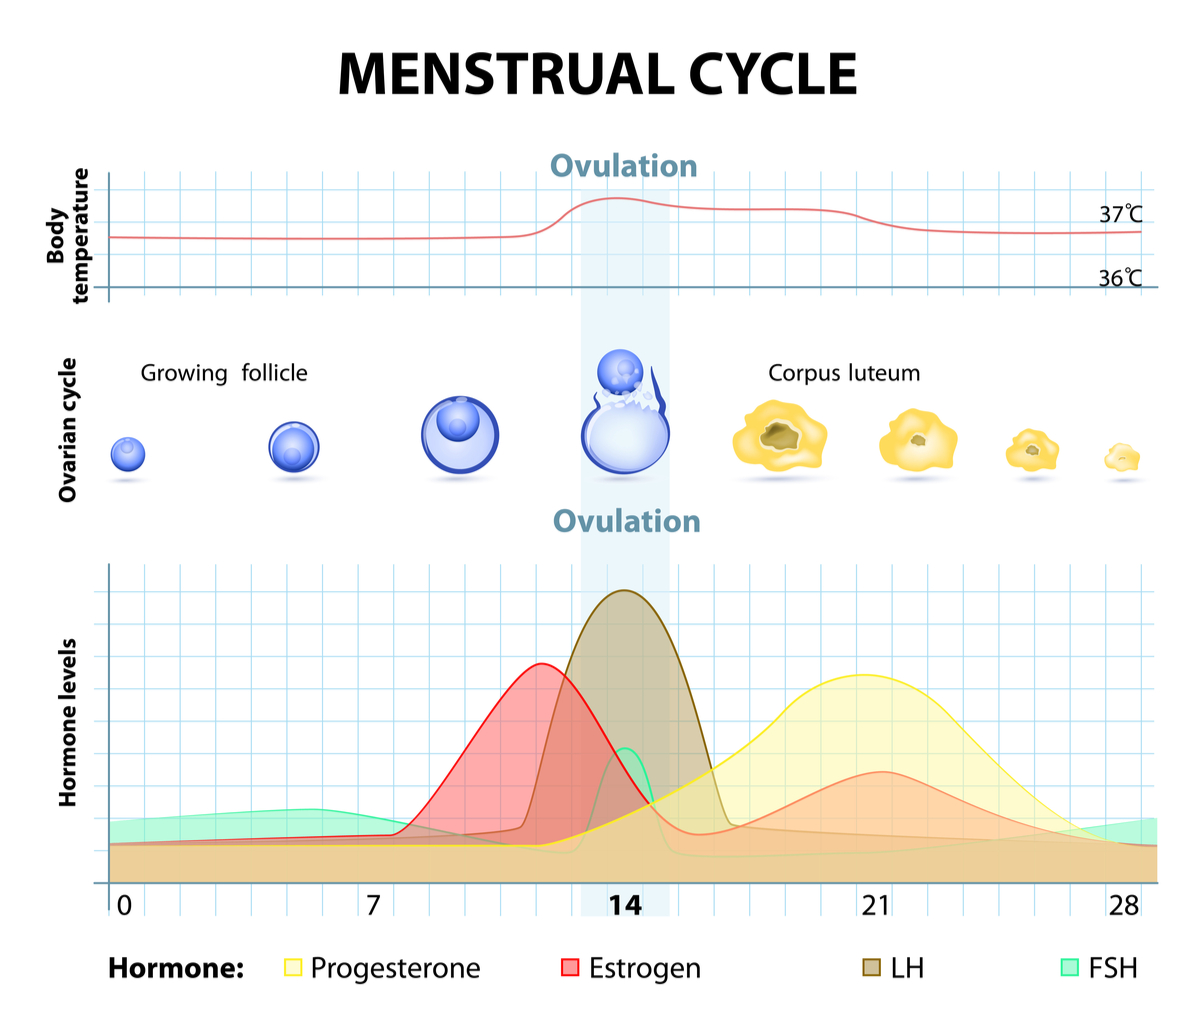 menstrual cycle chart with hormonal changes